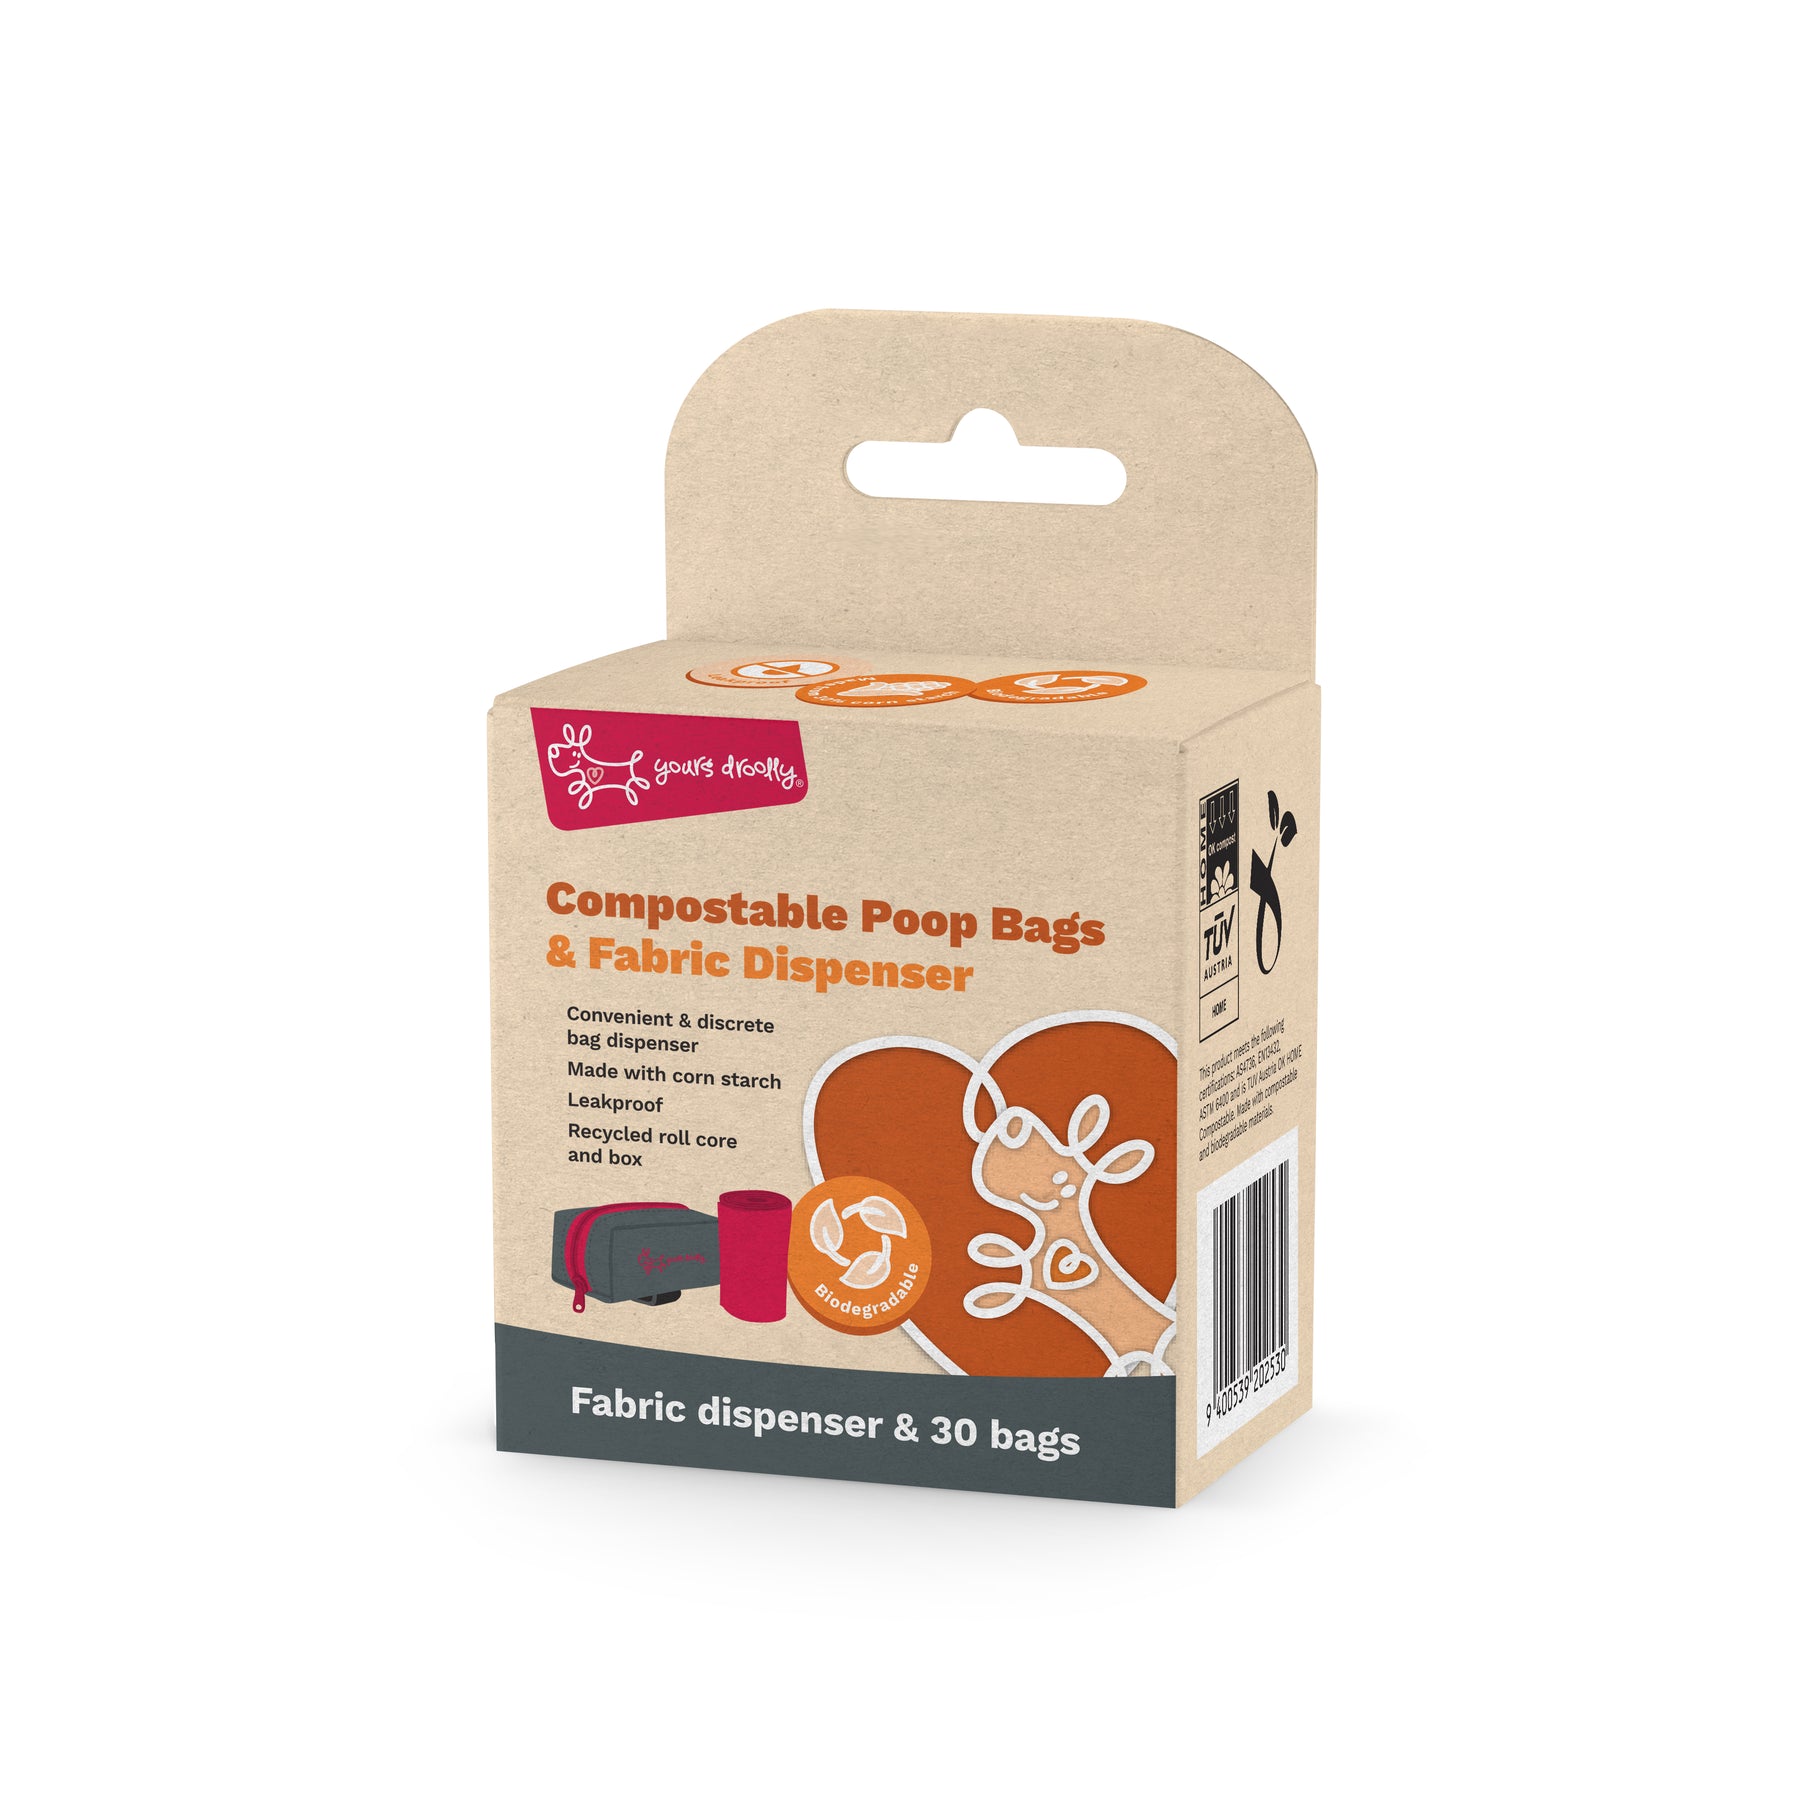 Compostable Poop Bags With Dispenser